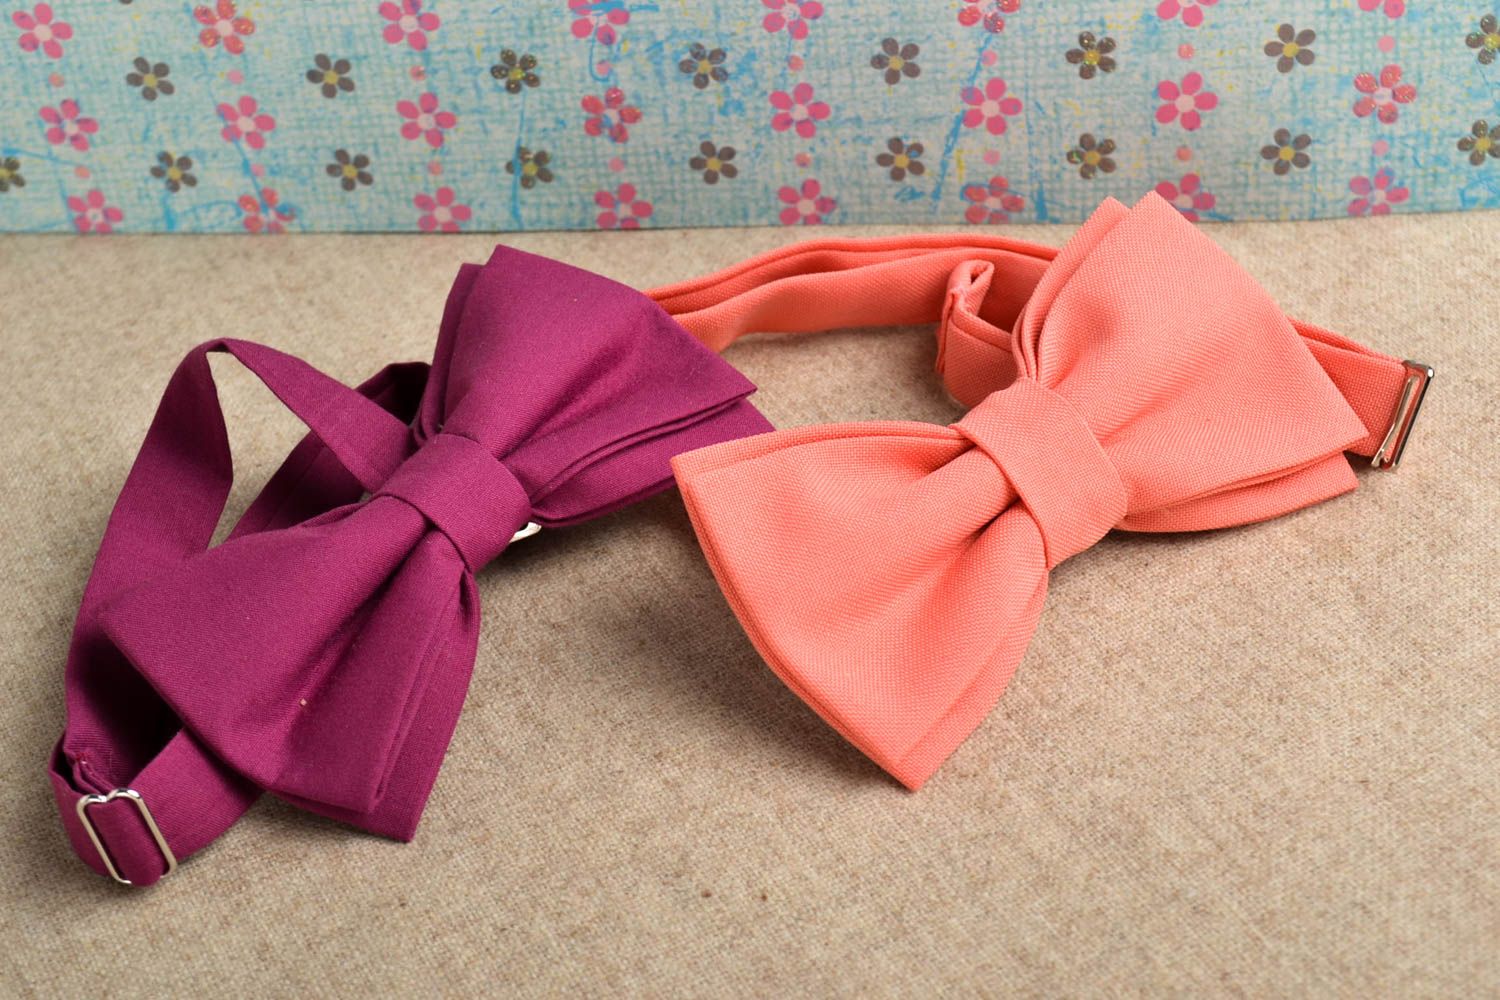 Handmade textile bow tie fabric bow tie accessories for friend present for men photo 1